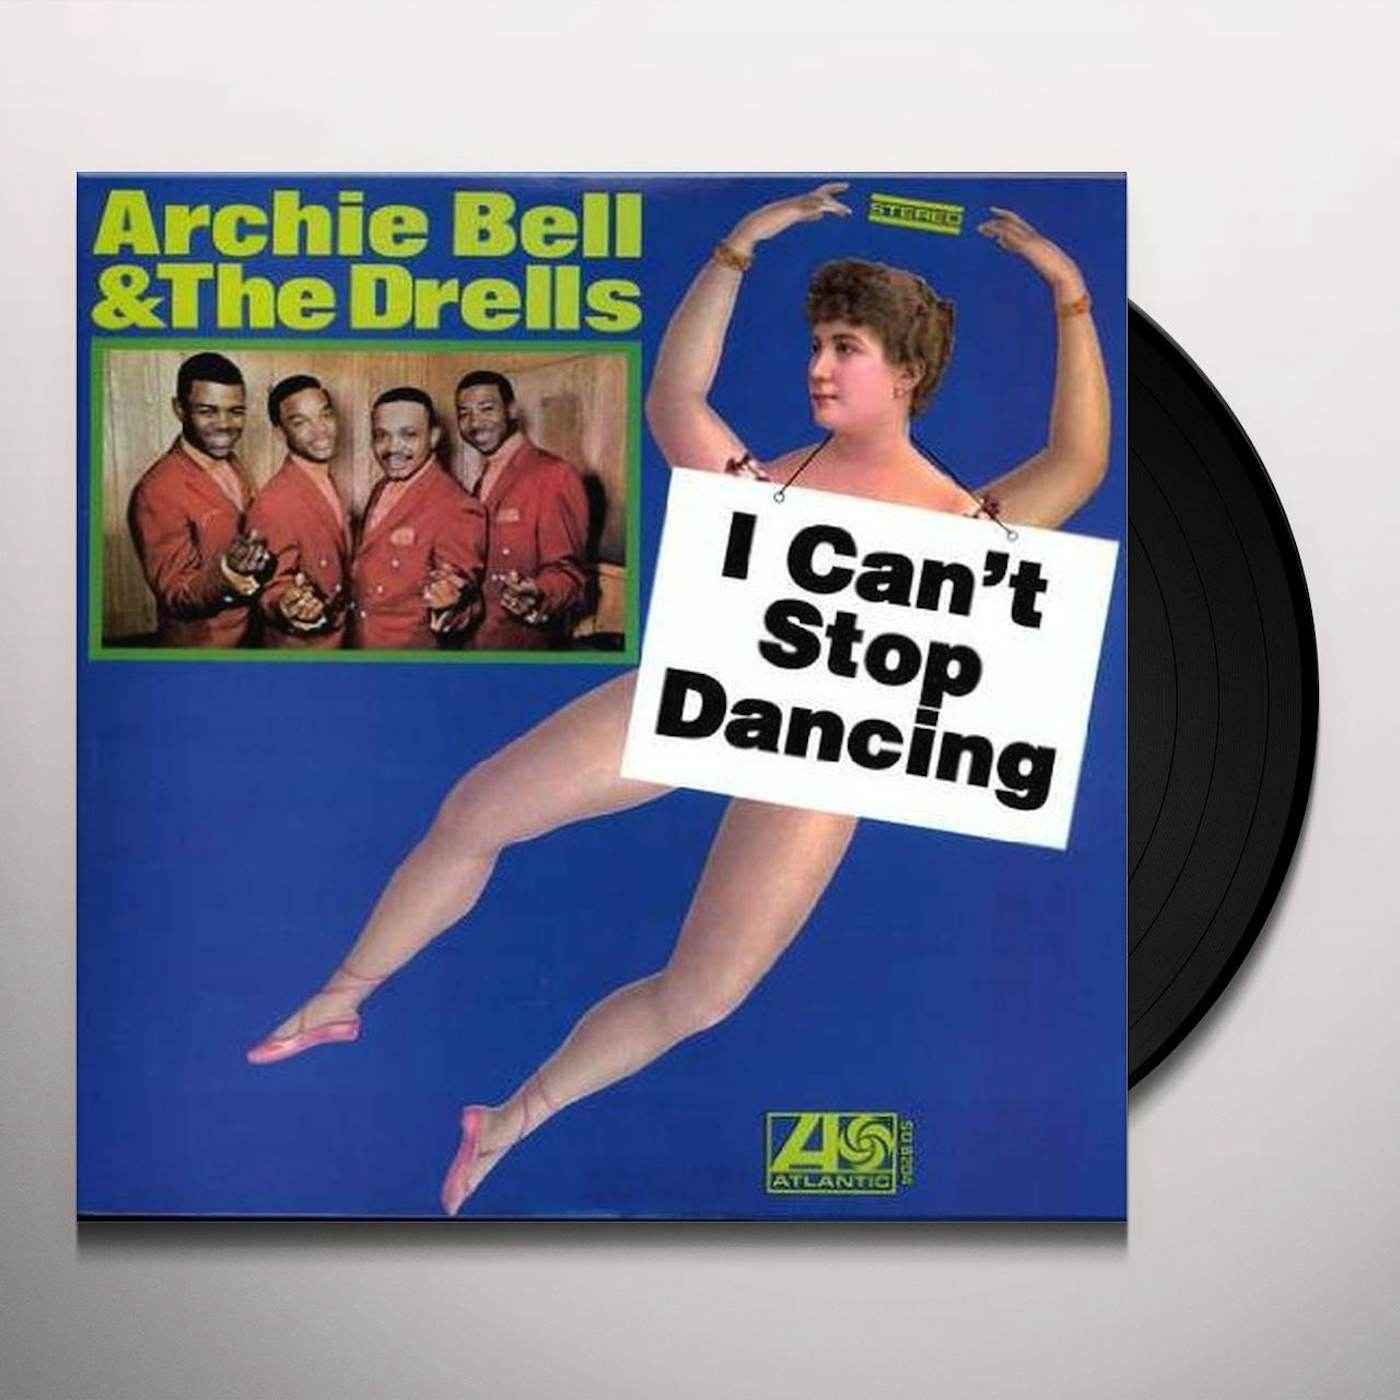 Archie Bell & The Drells I Can't Stop Dancing Vinyl Record